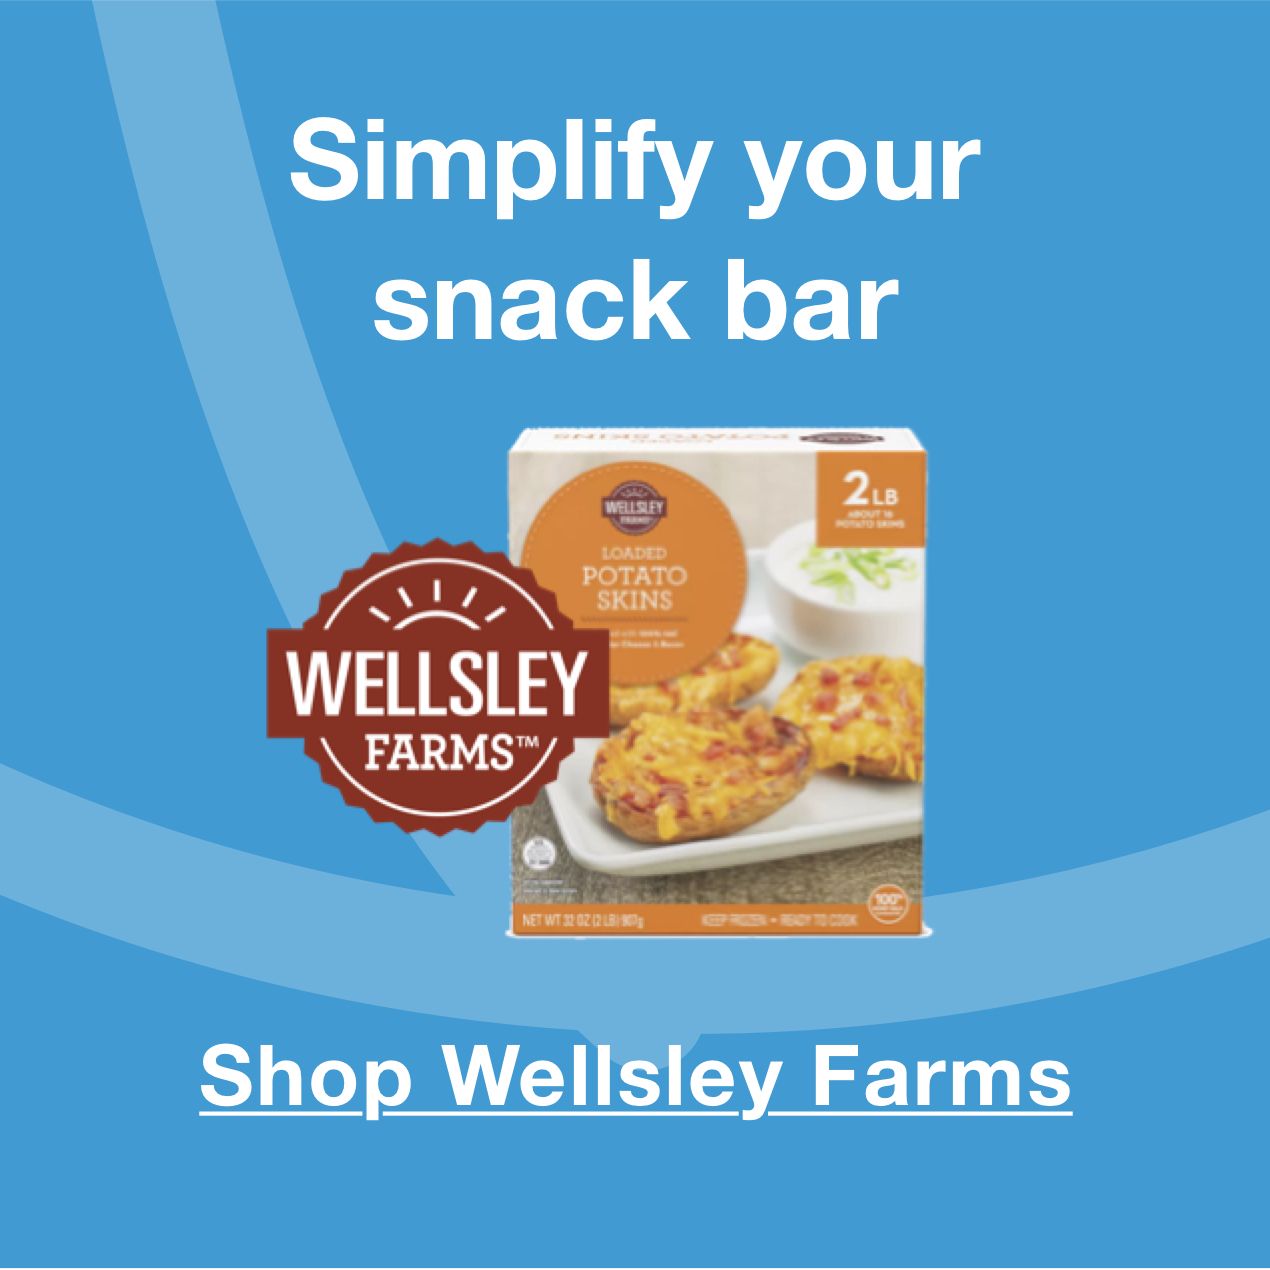 Simplify your snack bar. Click to shop Wellsley Farms